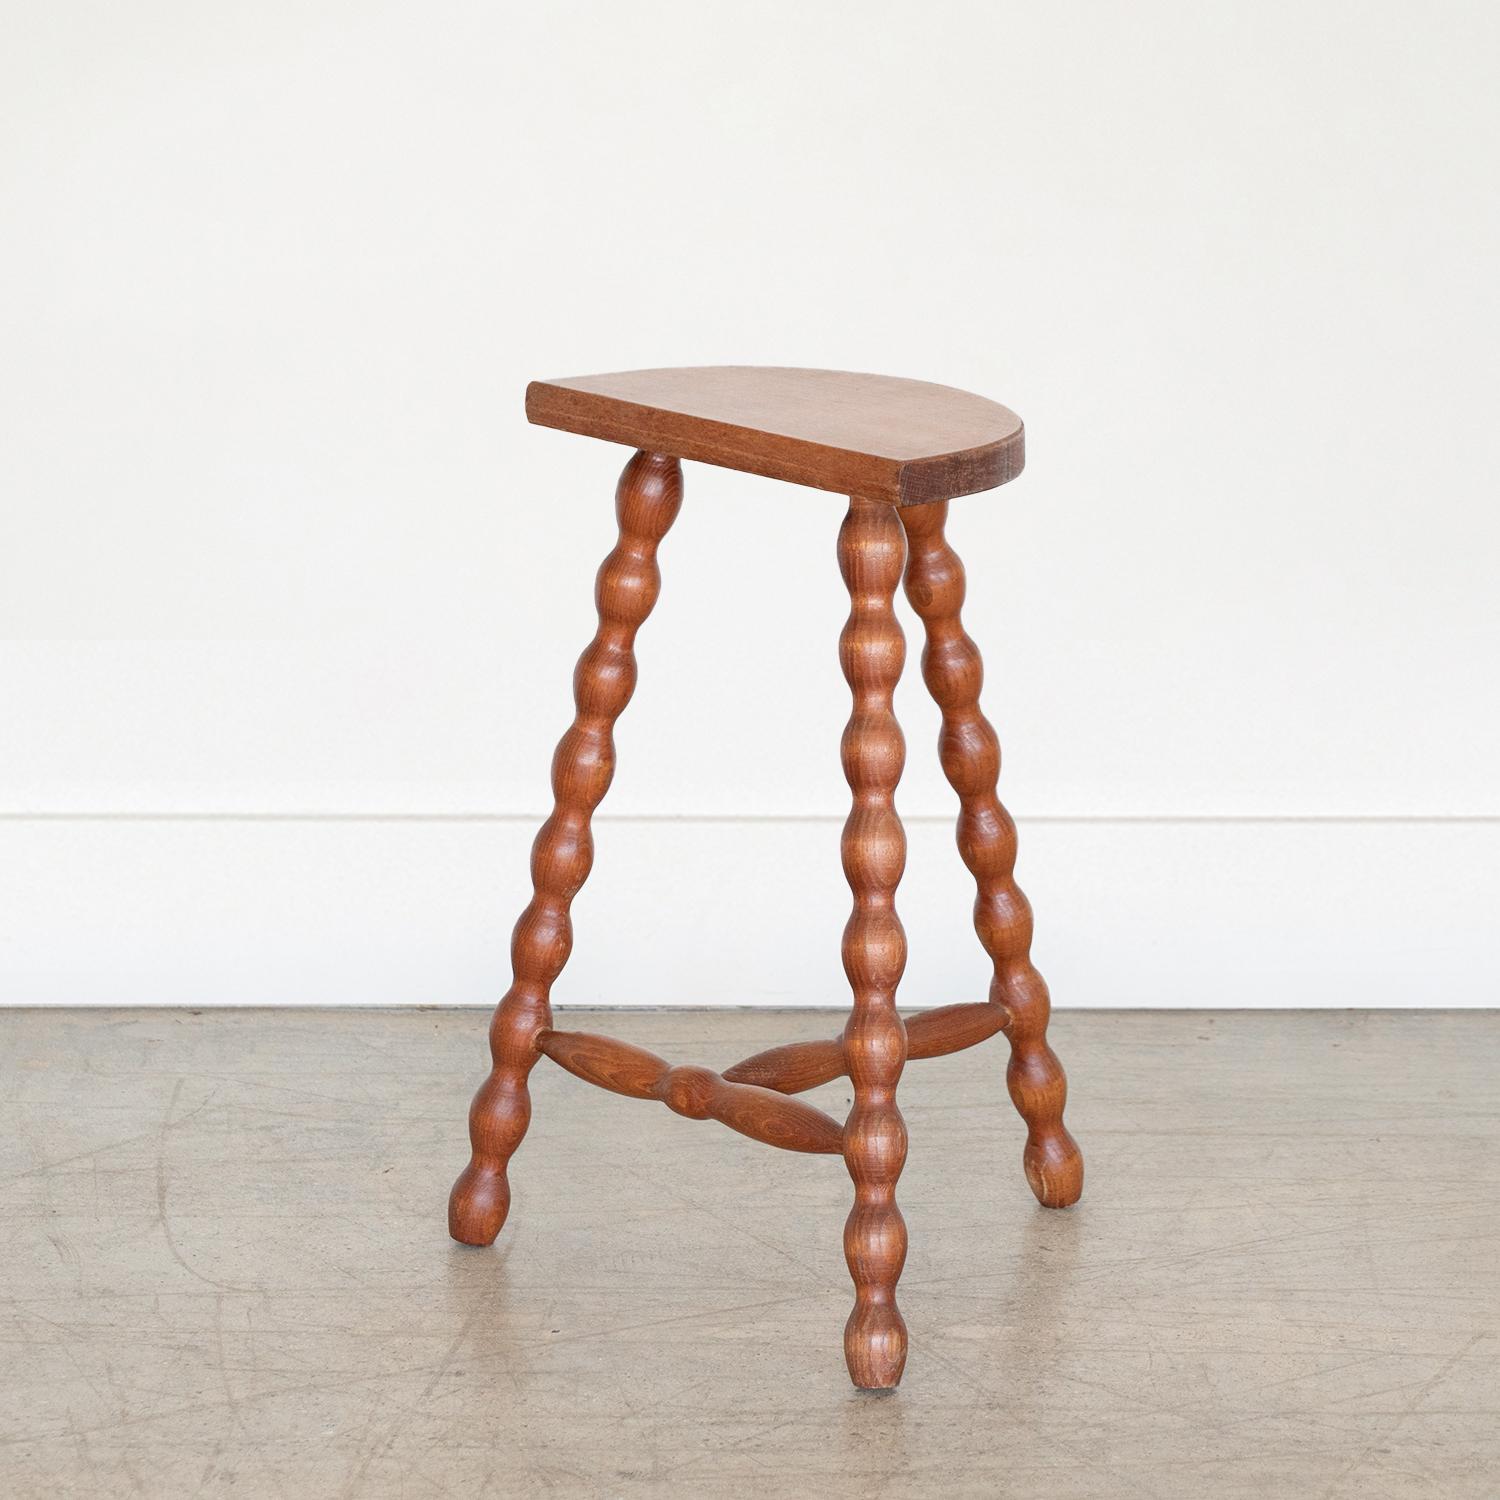 Vintage tall wood stool with semi-circle seat and wavy tripod legs from France. Original finish shows great age and patina. Can be used as a stool or as side table. 



